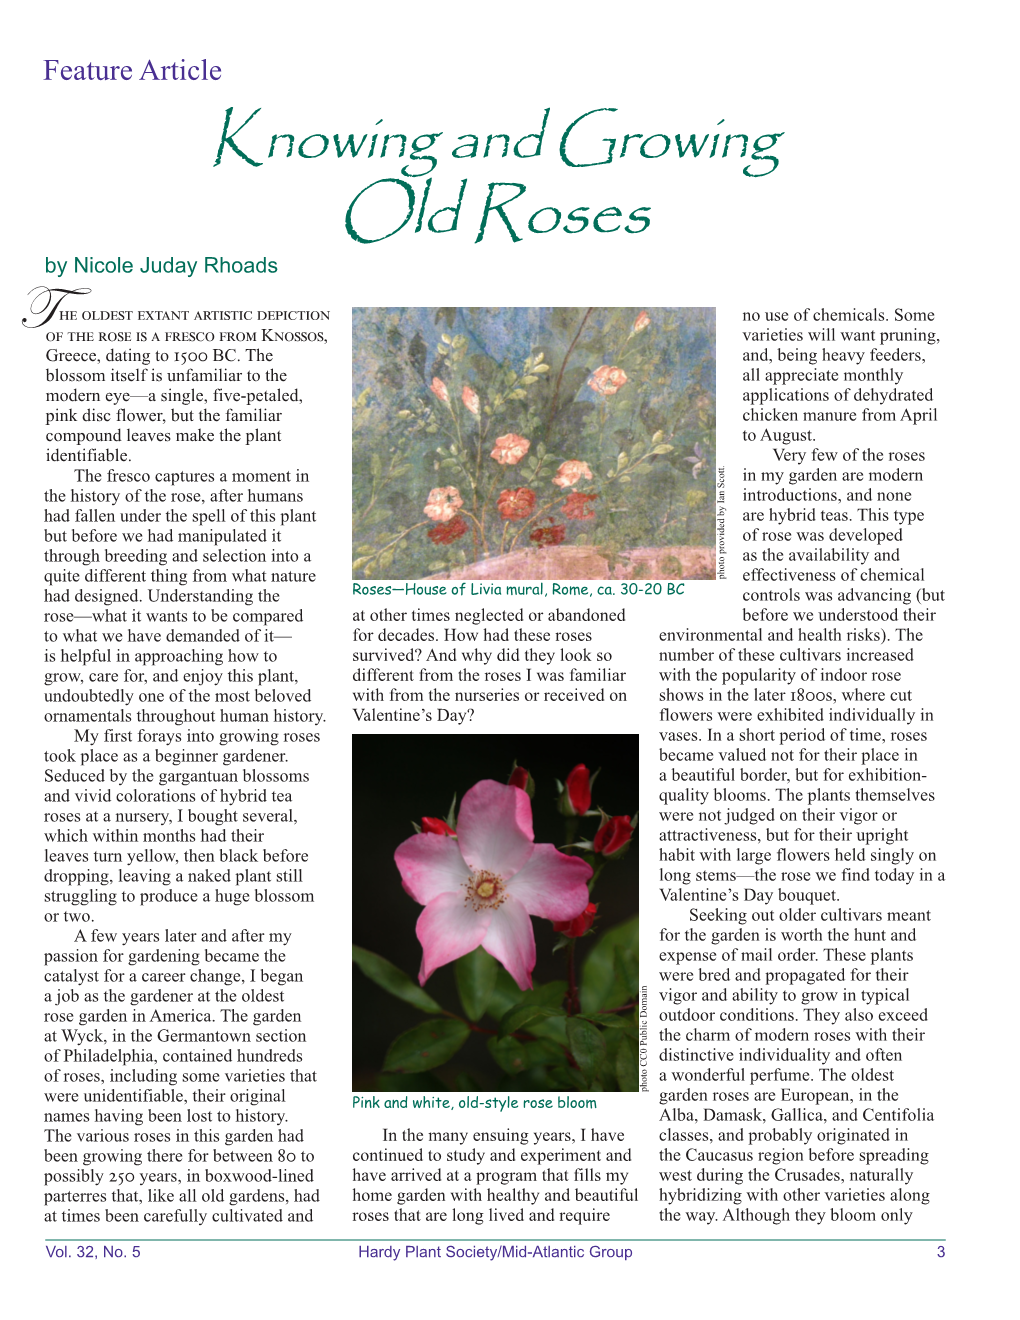 Knowing and Growing Old Roses by Nicole Juday Rhoads